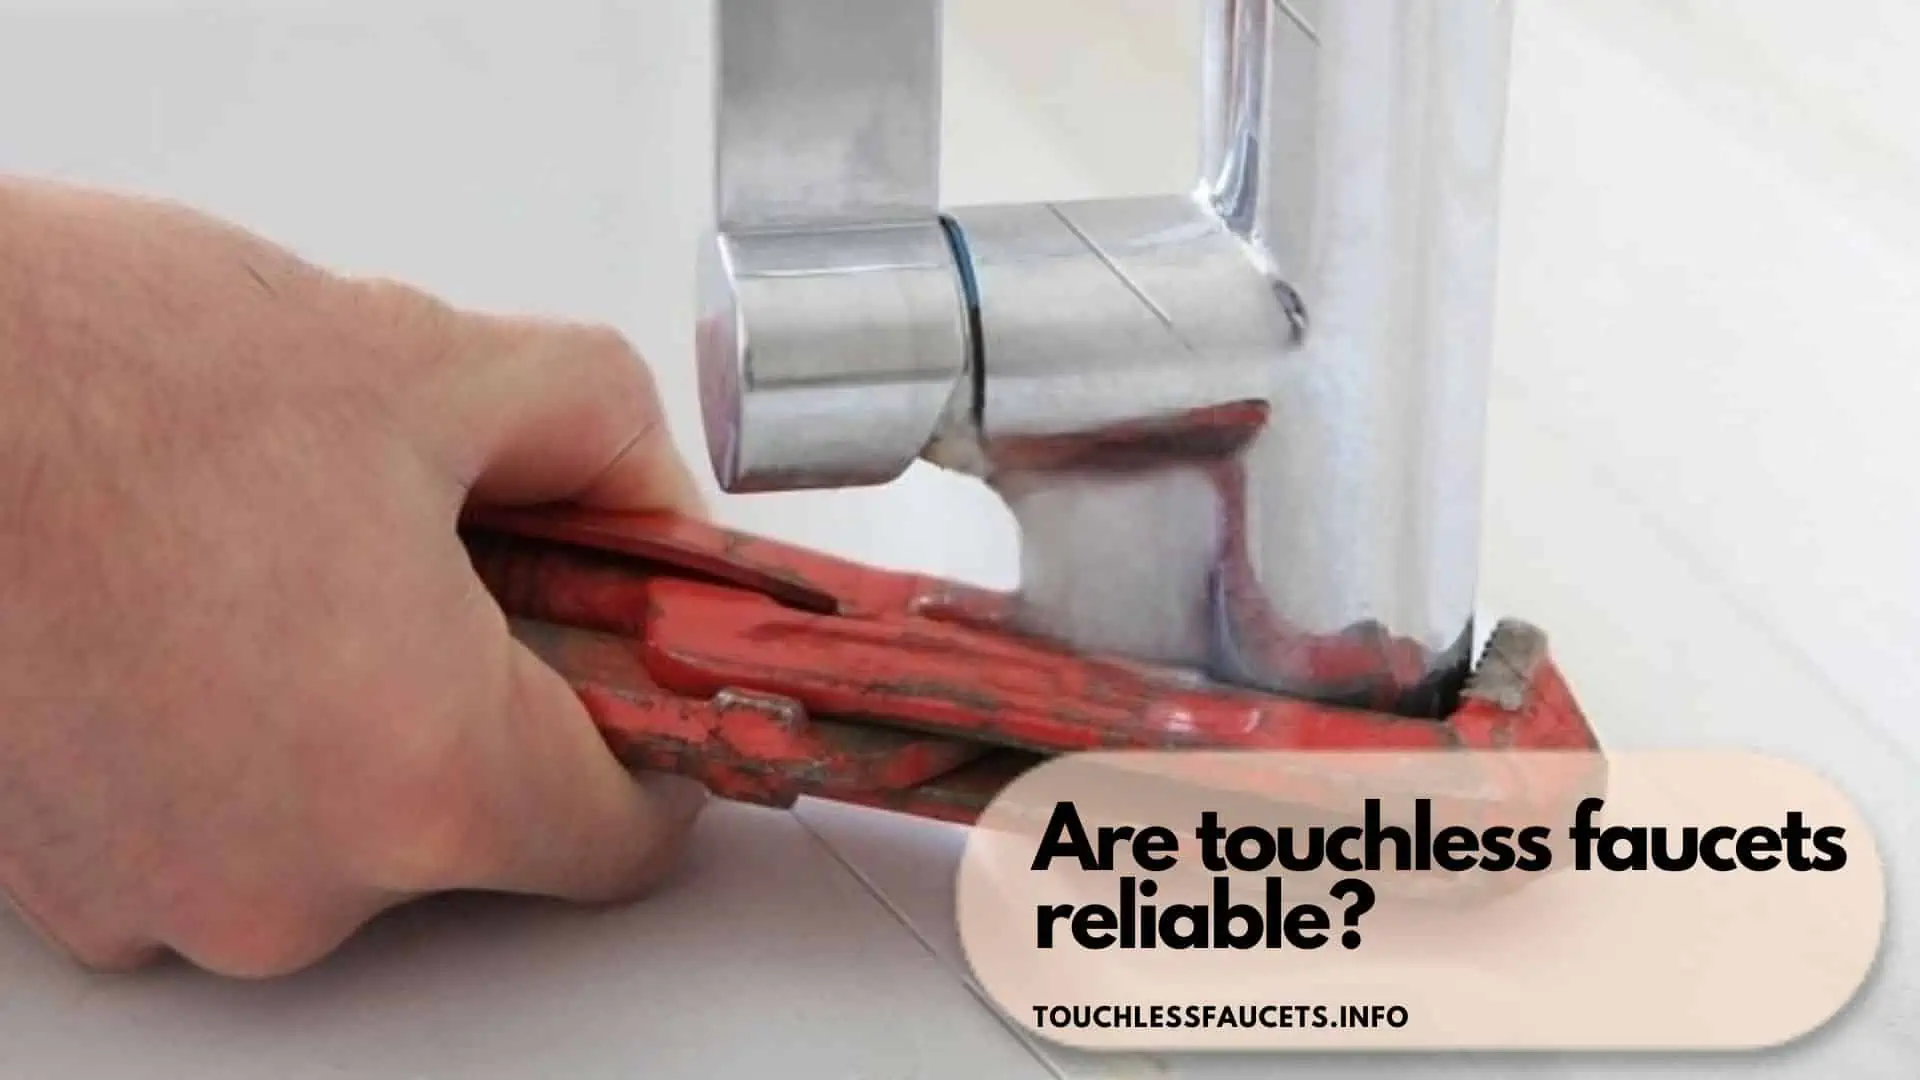 Are touchless faucets reliable?